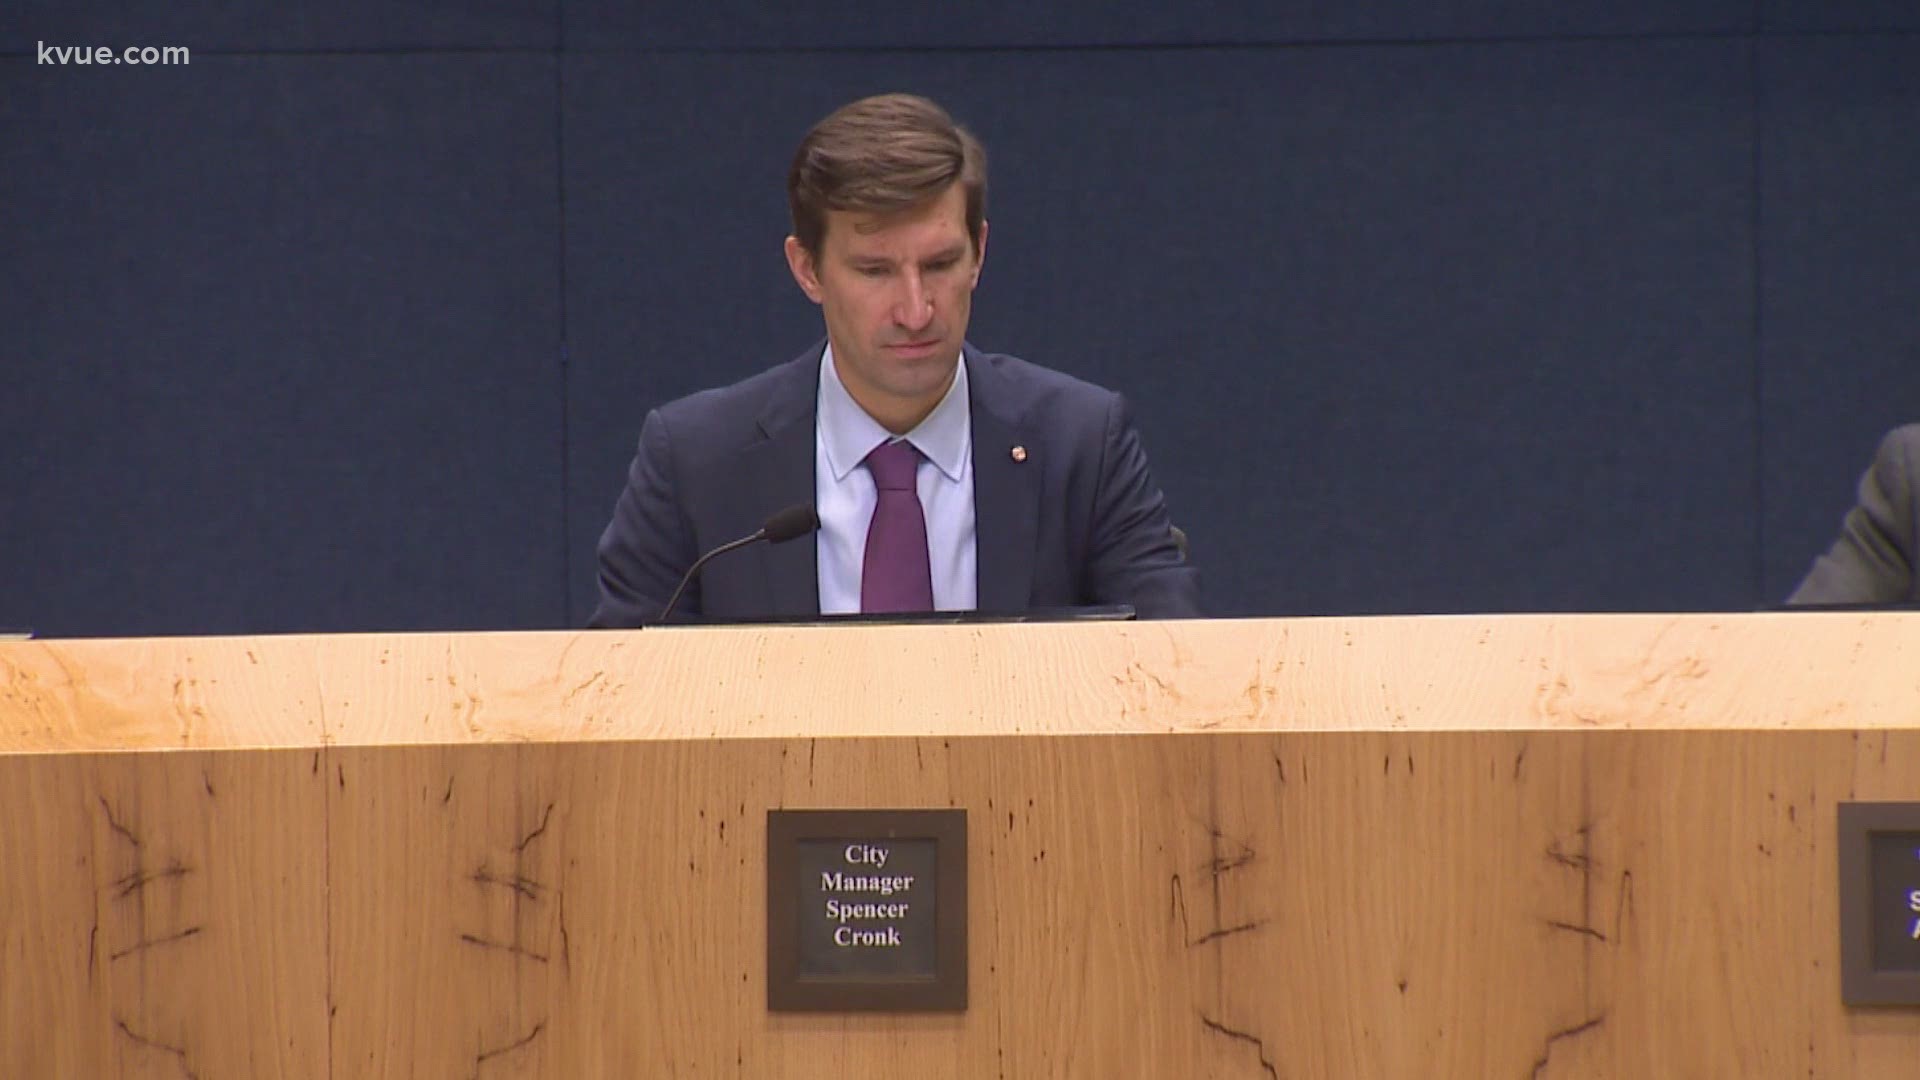 City Manager Spencer Cronk may be in the hot seat over his management of the Austin Police Department. The city council held a performance review with Cronk Tuesday.